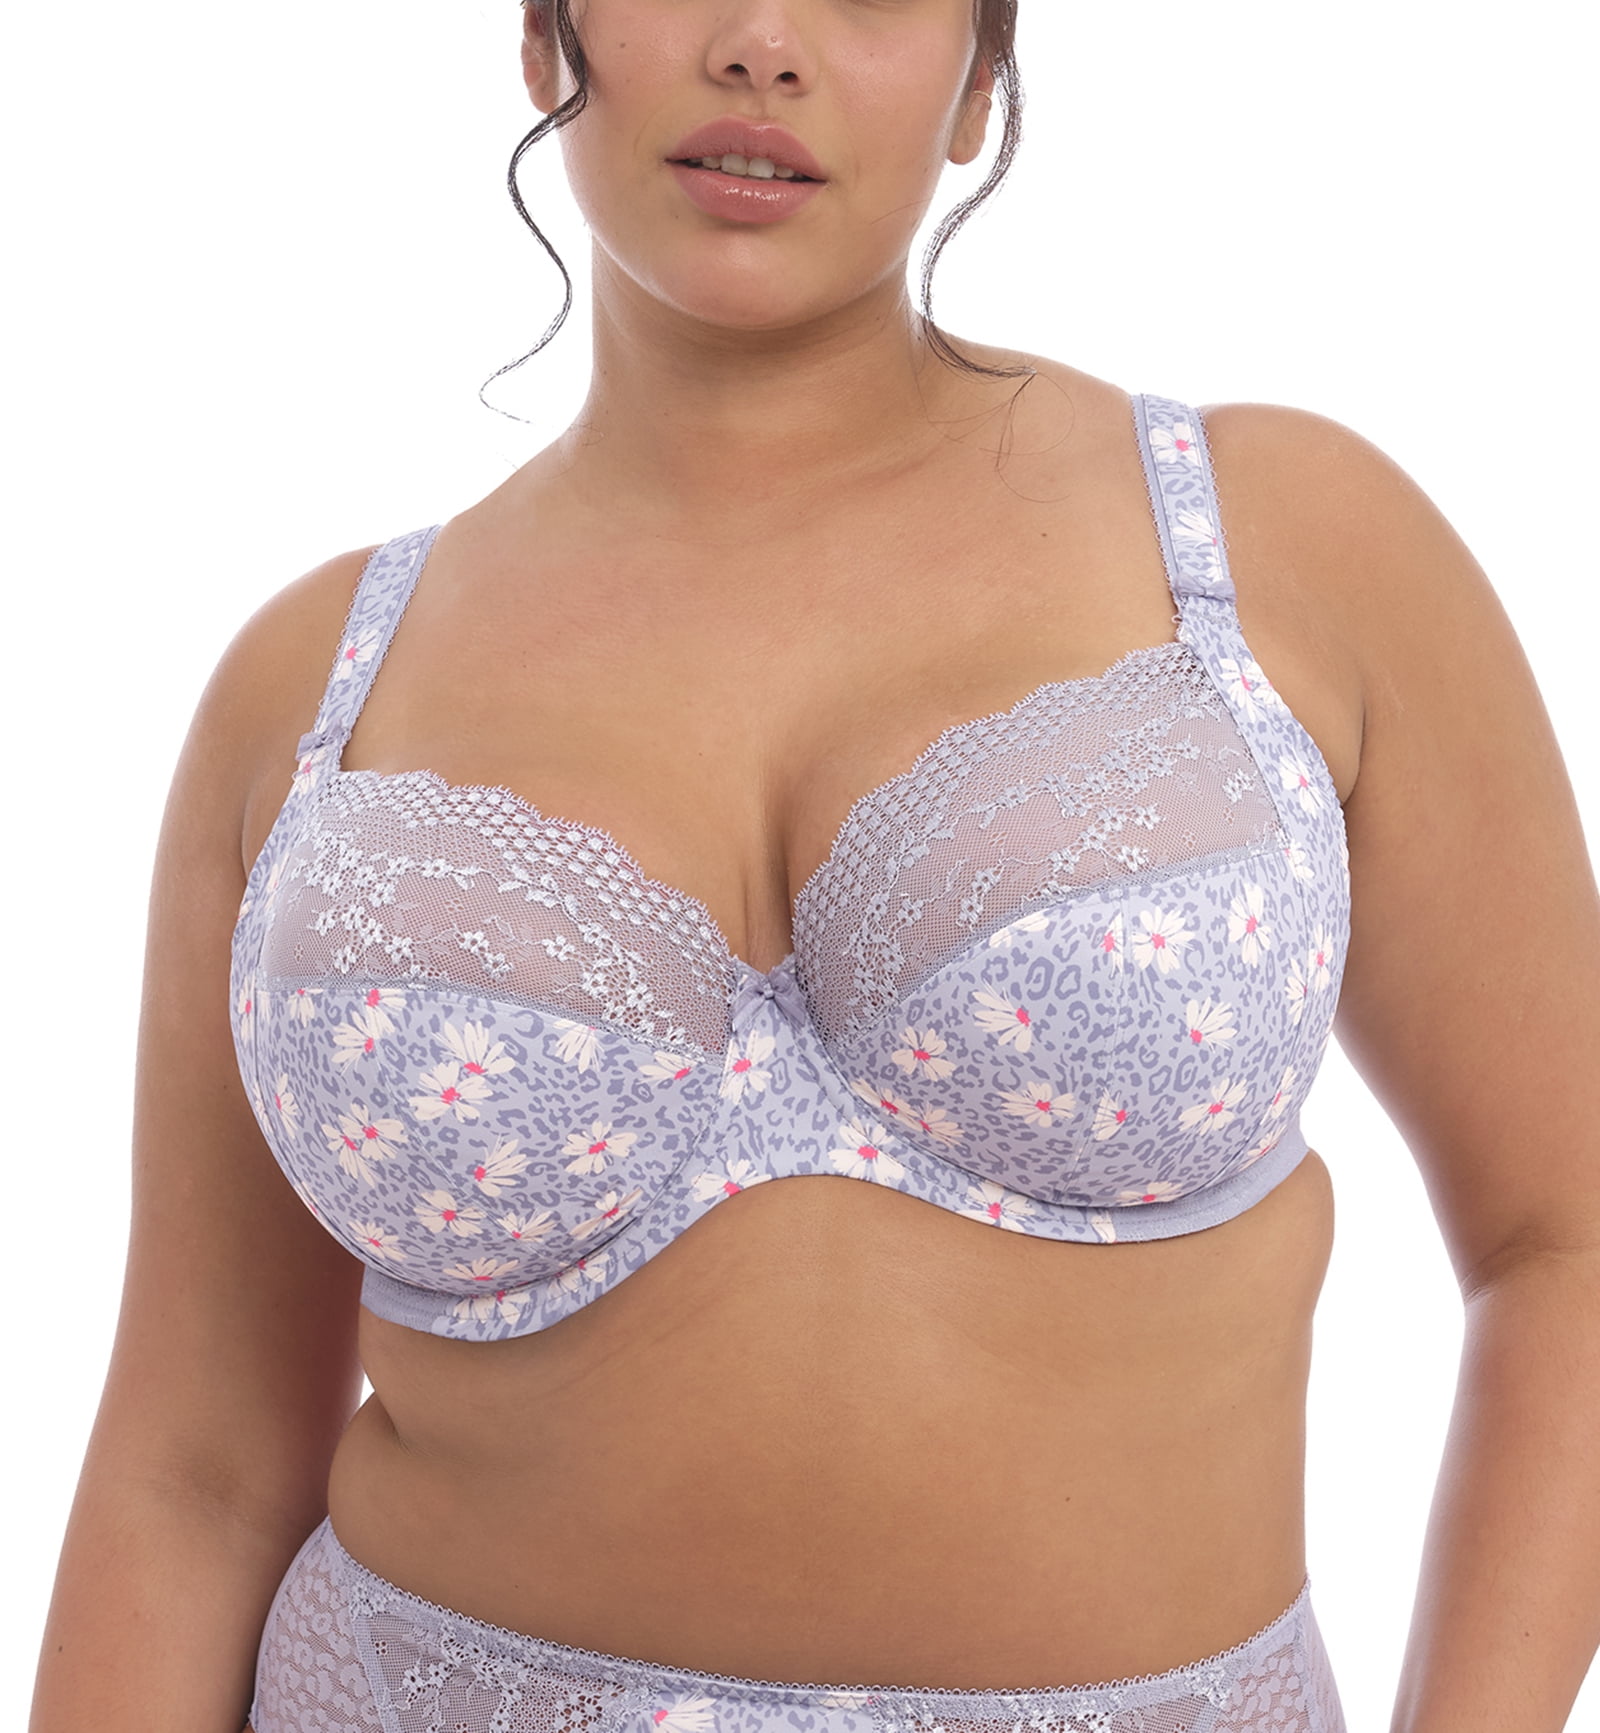 Foundations Professional Bra Fitting - ✨NEW✨ Elomi Smoothing is